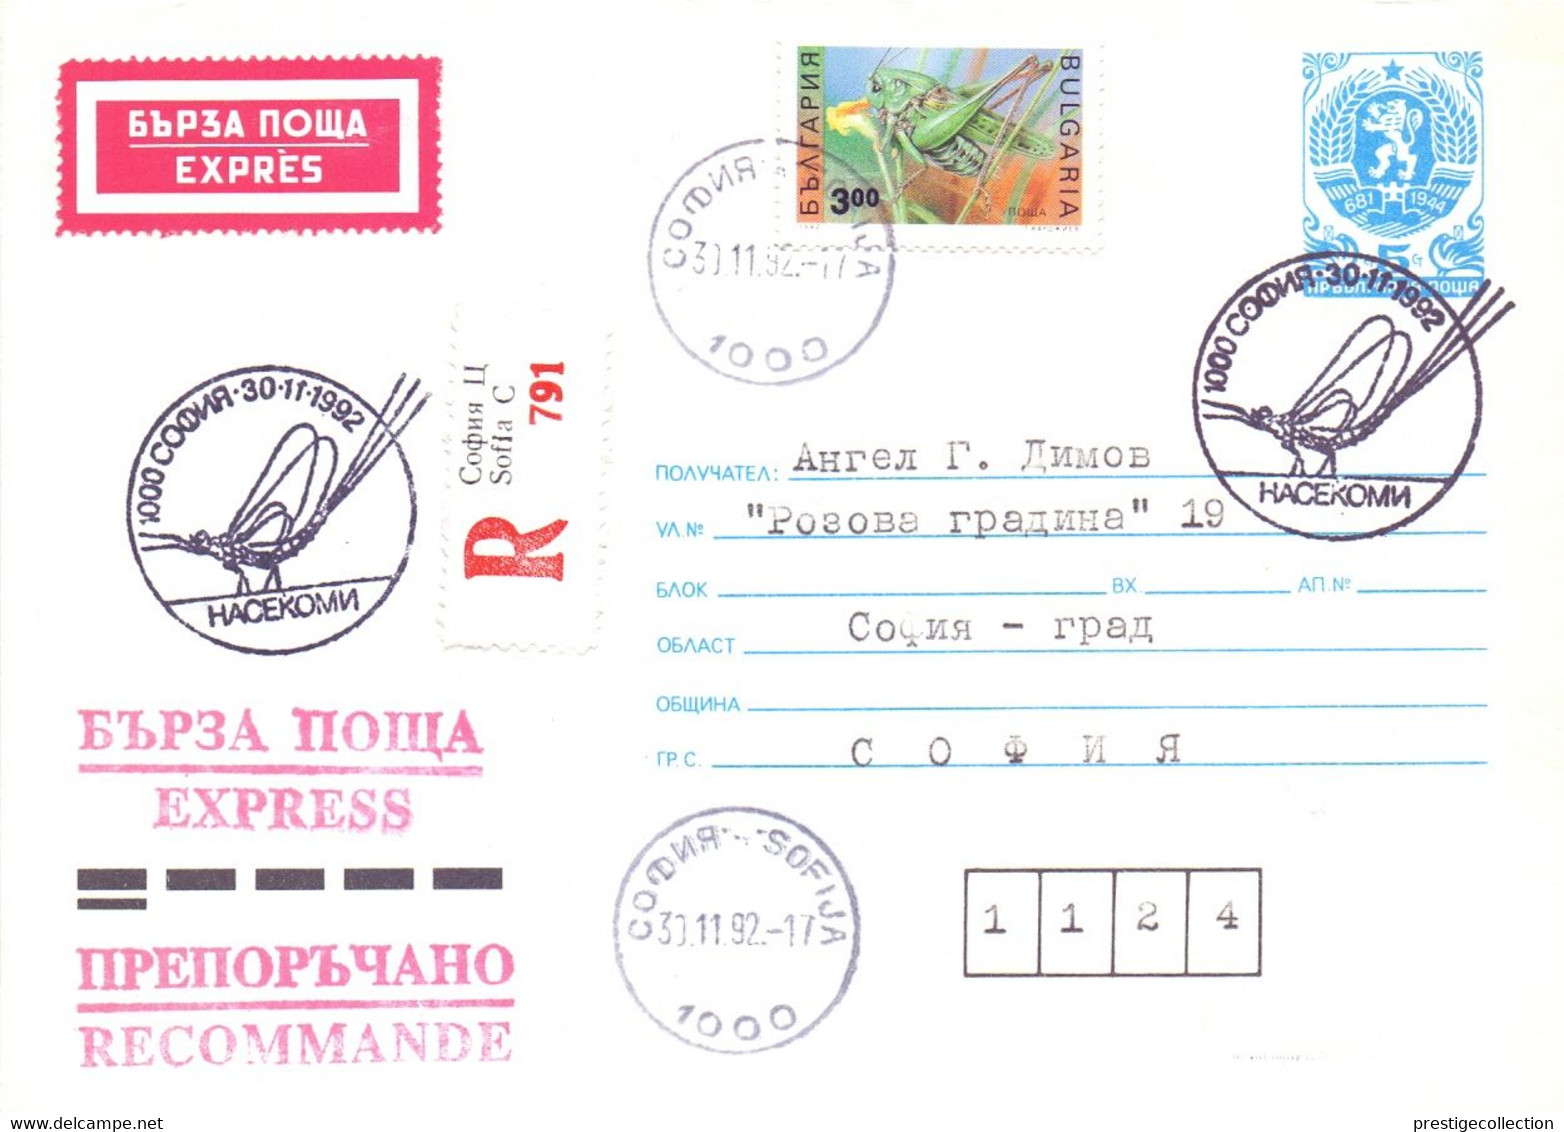 BULGARIA EXPRES  END REGISTRED MAIL 1992  POST MAIL  COVER    (OTT200139) - Express Stamps